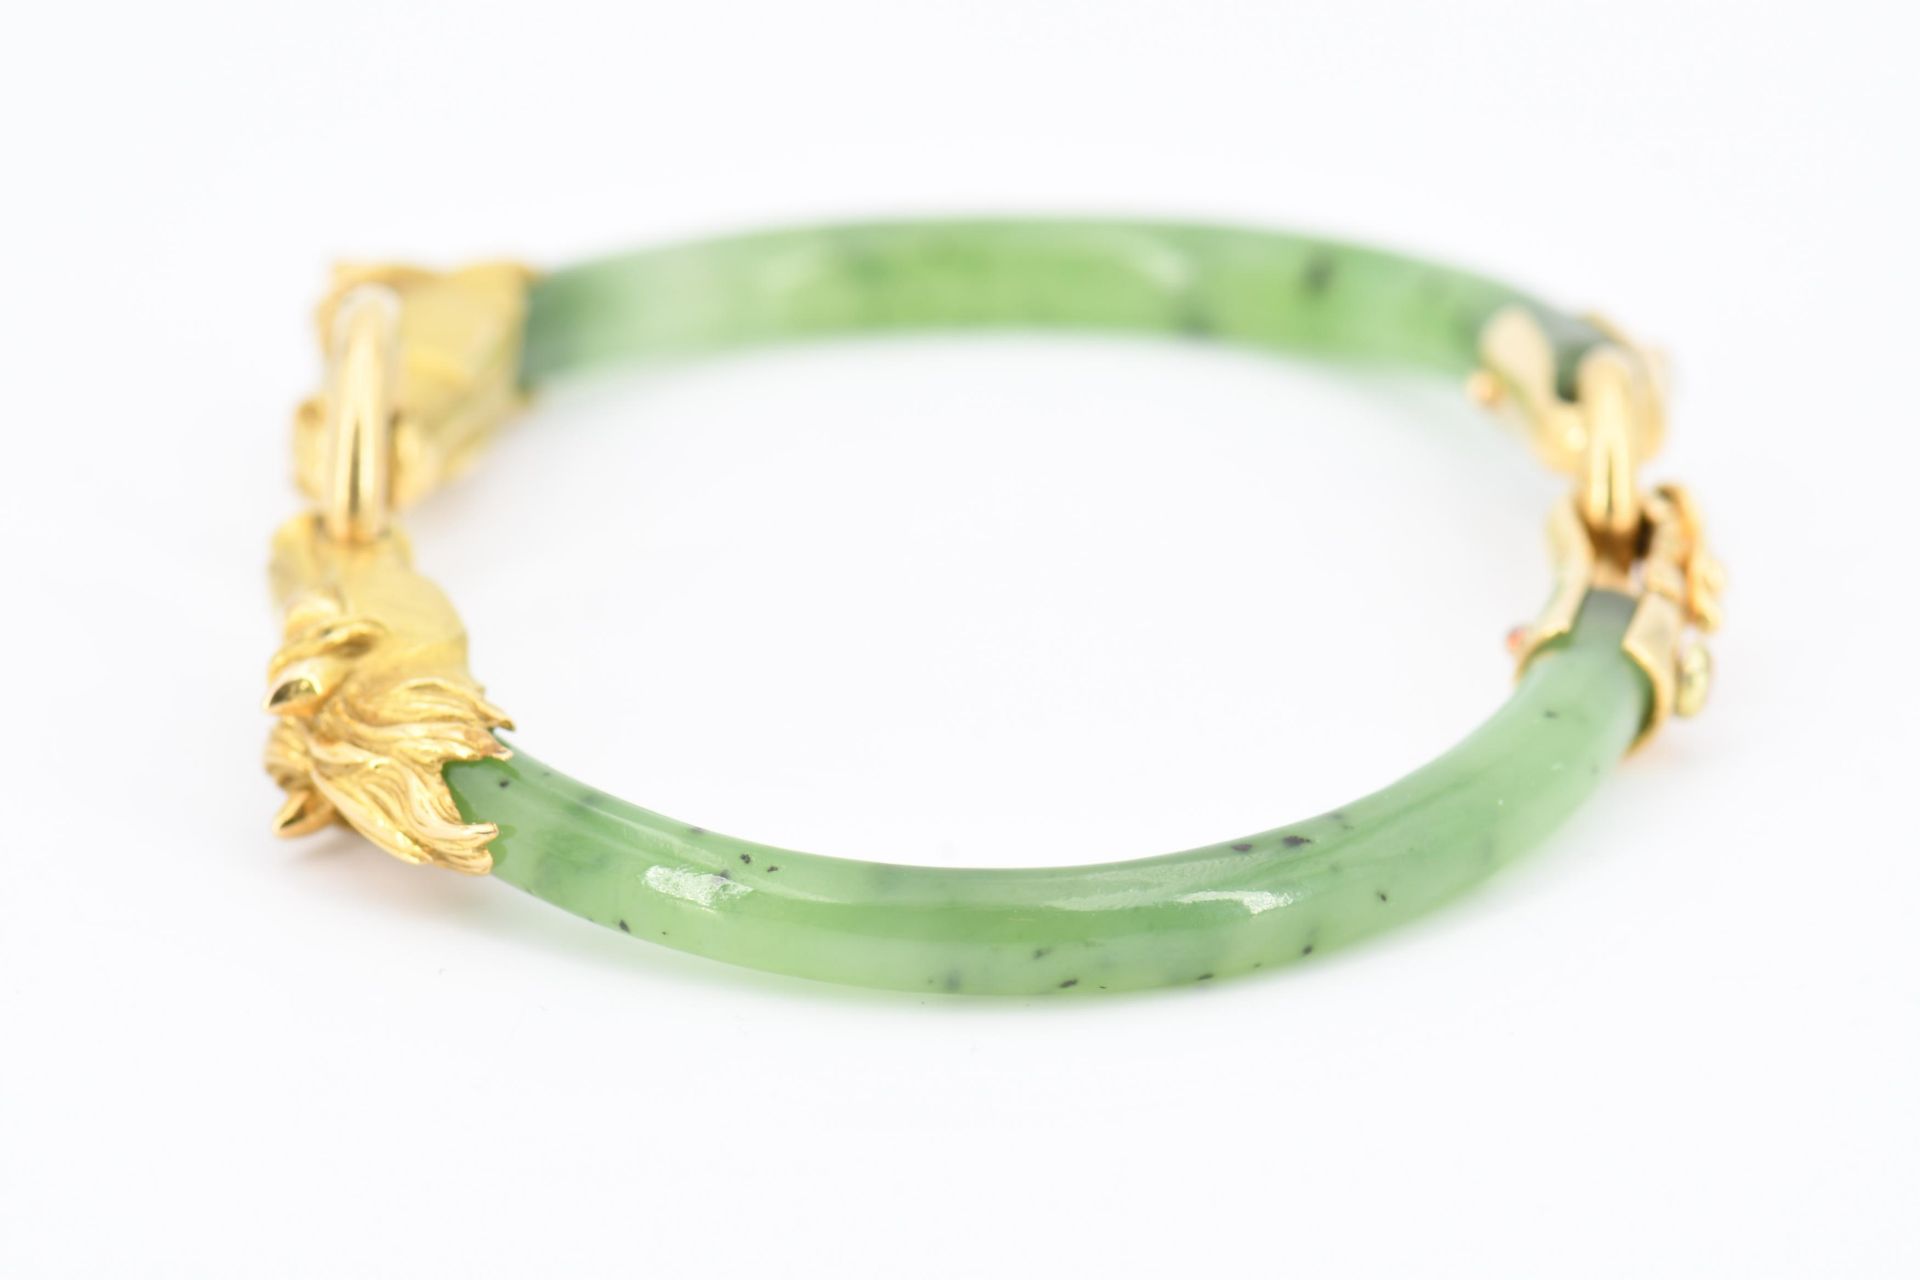 Jade-Bangle with Horse Motif - Image 5 of 6